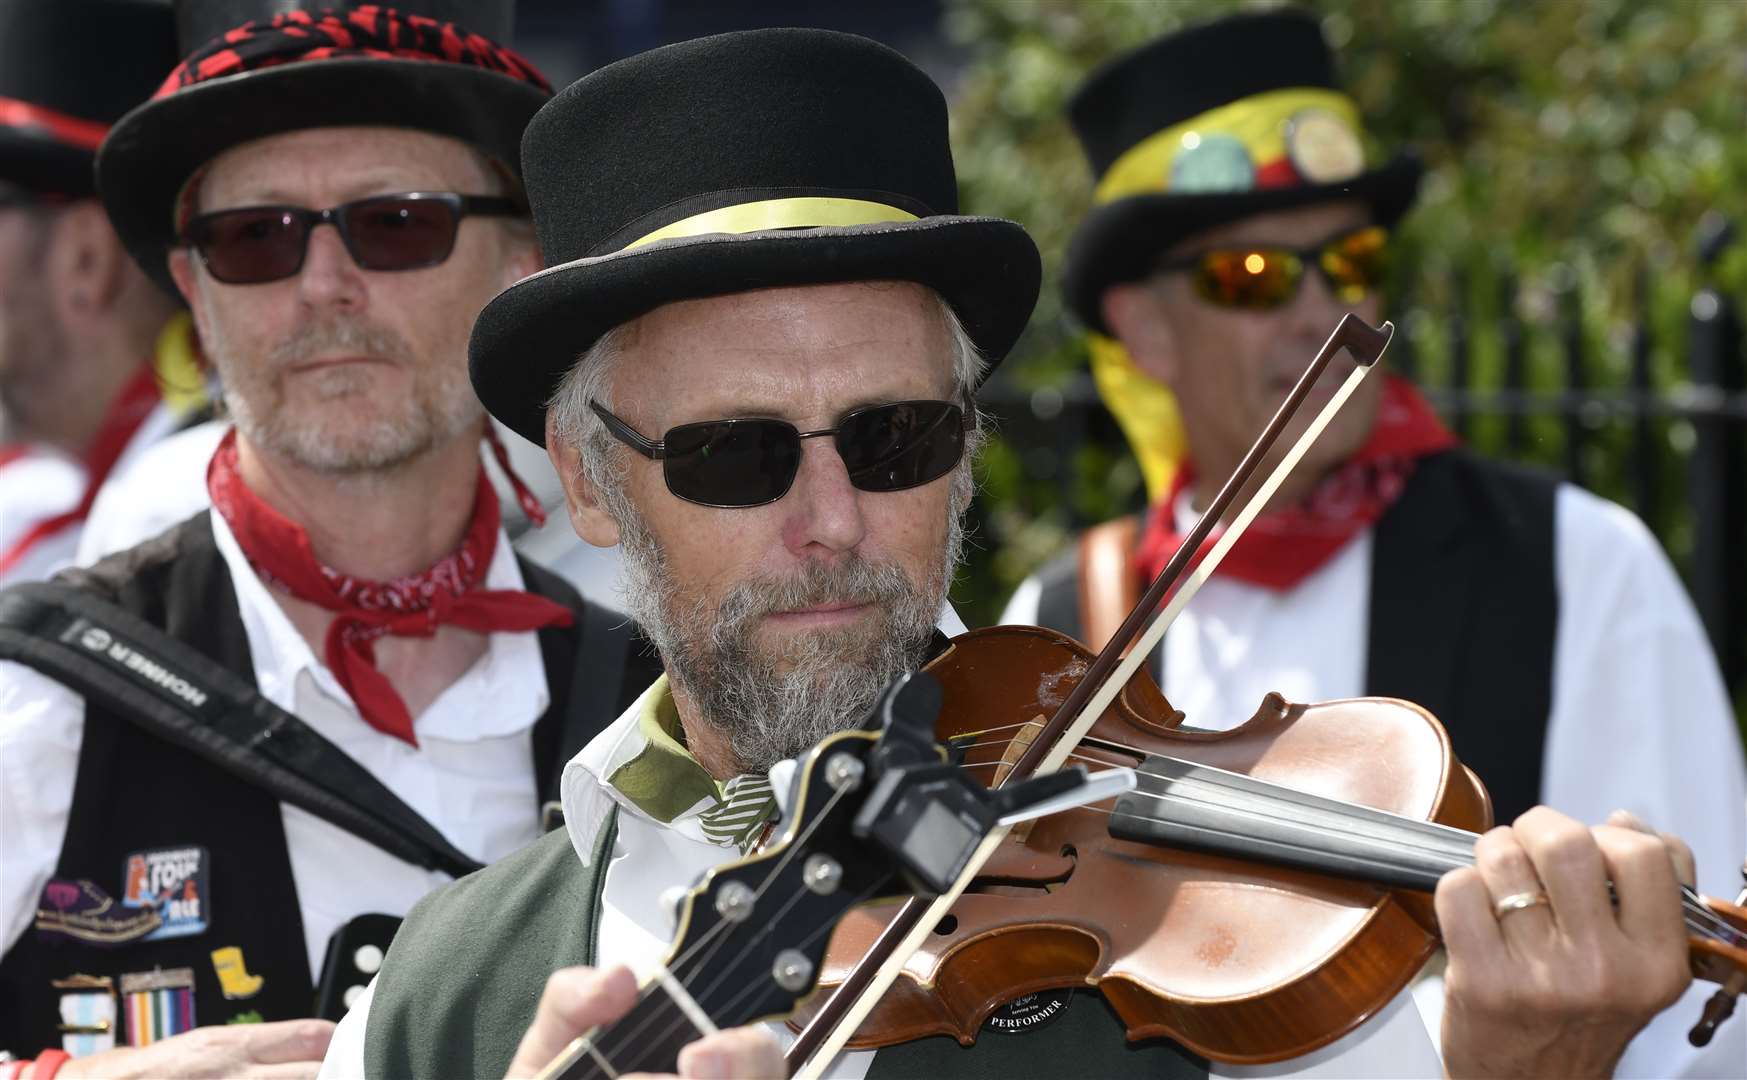 Broadstairs Folk Week brings music out on the streets Picture: Tony Flashman